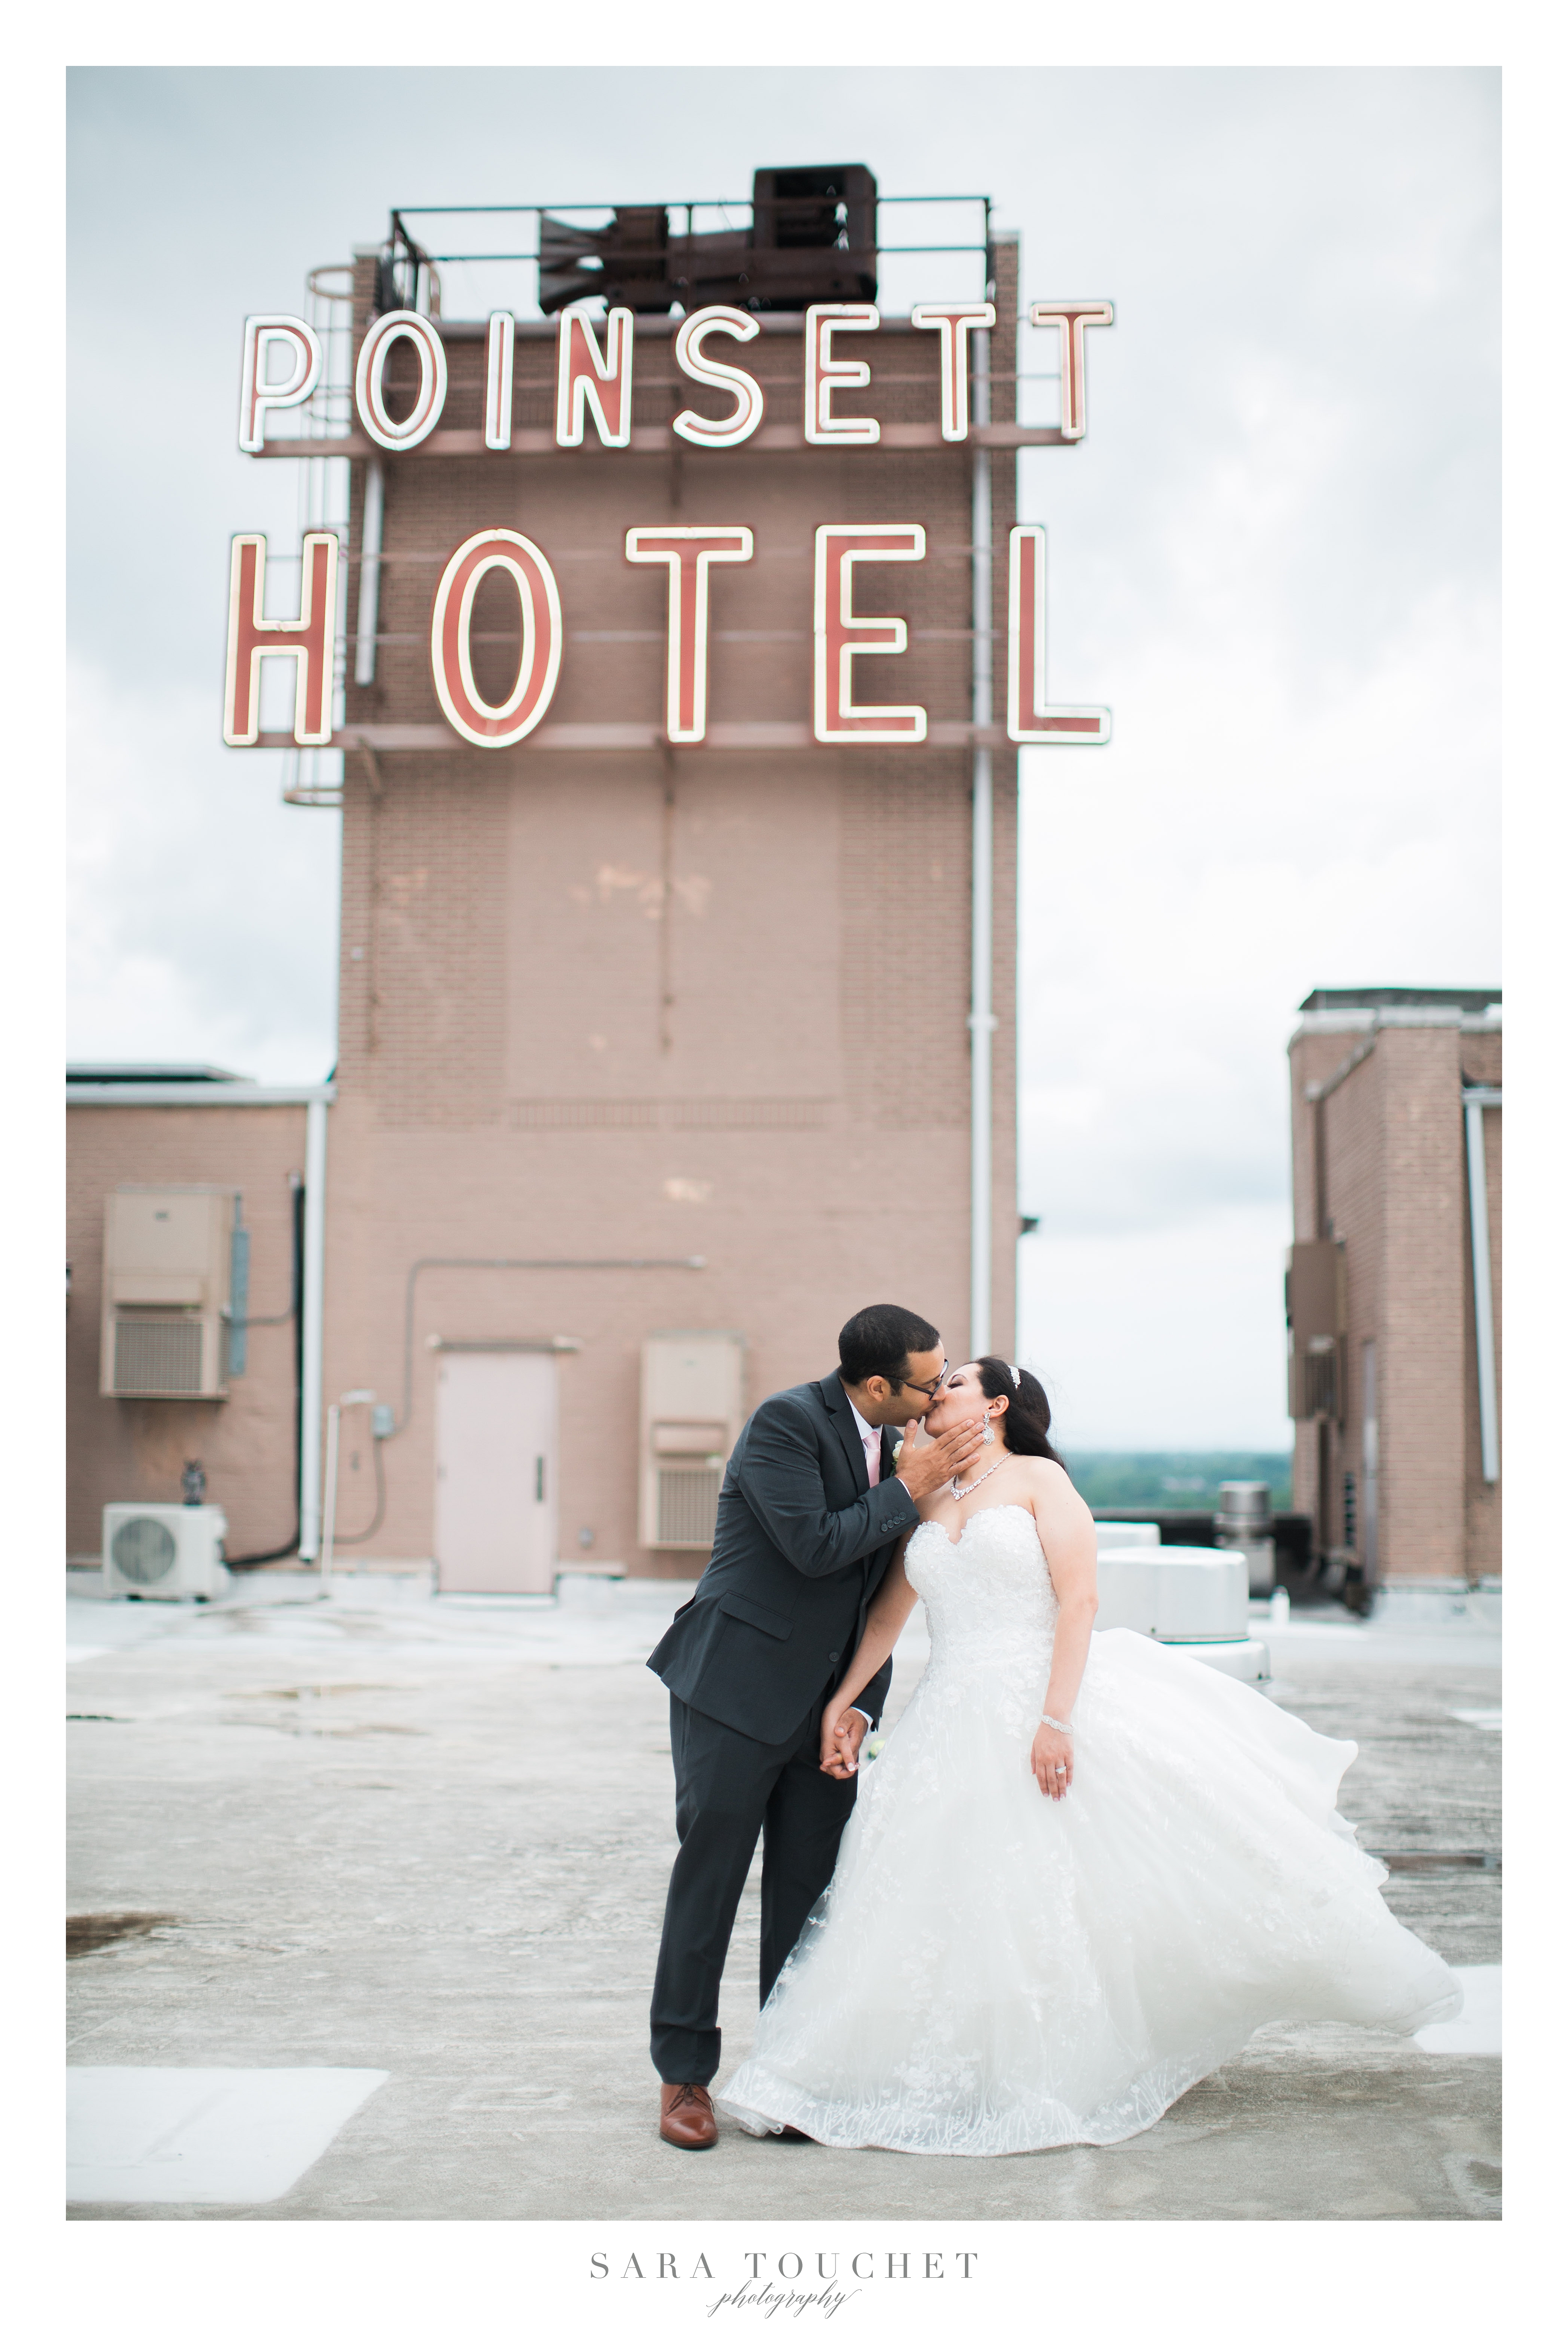 Poinsett Hotel Wedding and Reception for Best of